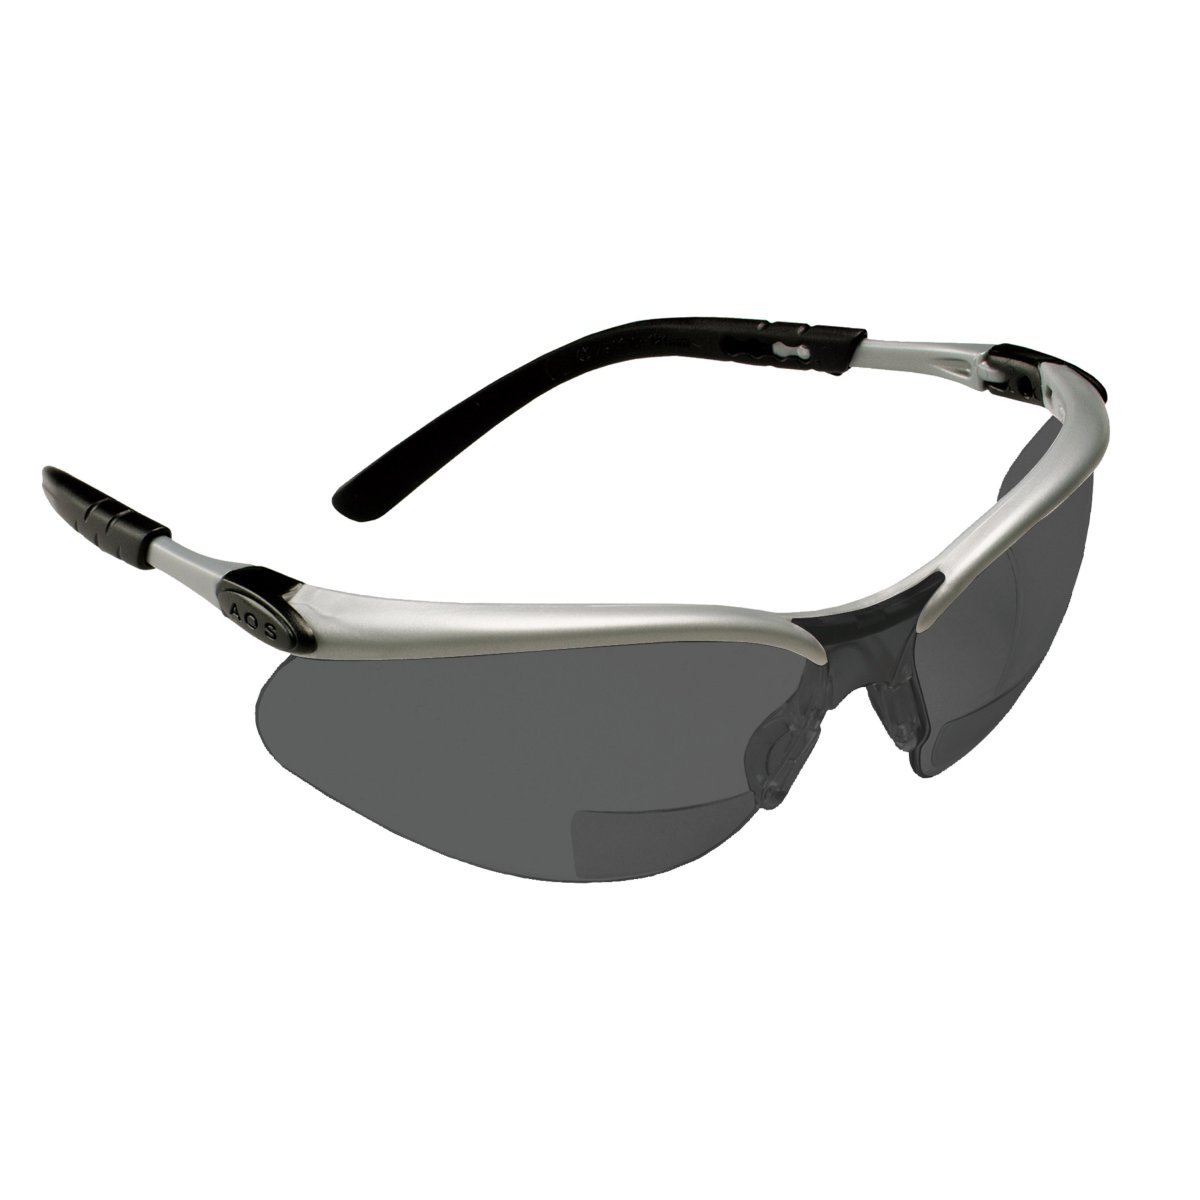 3M™ BX™ Reader Protective Eyewear 11379-00000-20 Gray Lens, Silver Frame, +2.5 Diopter (Availability restrictions apply.)